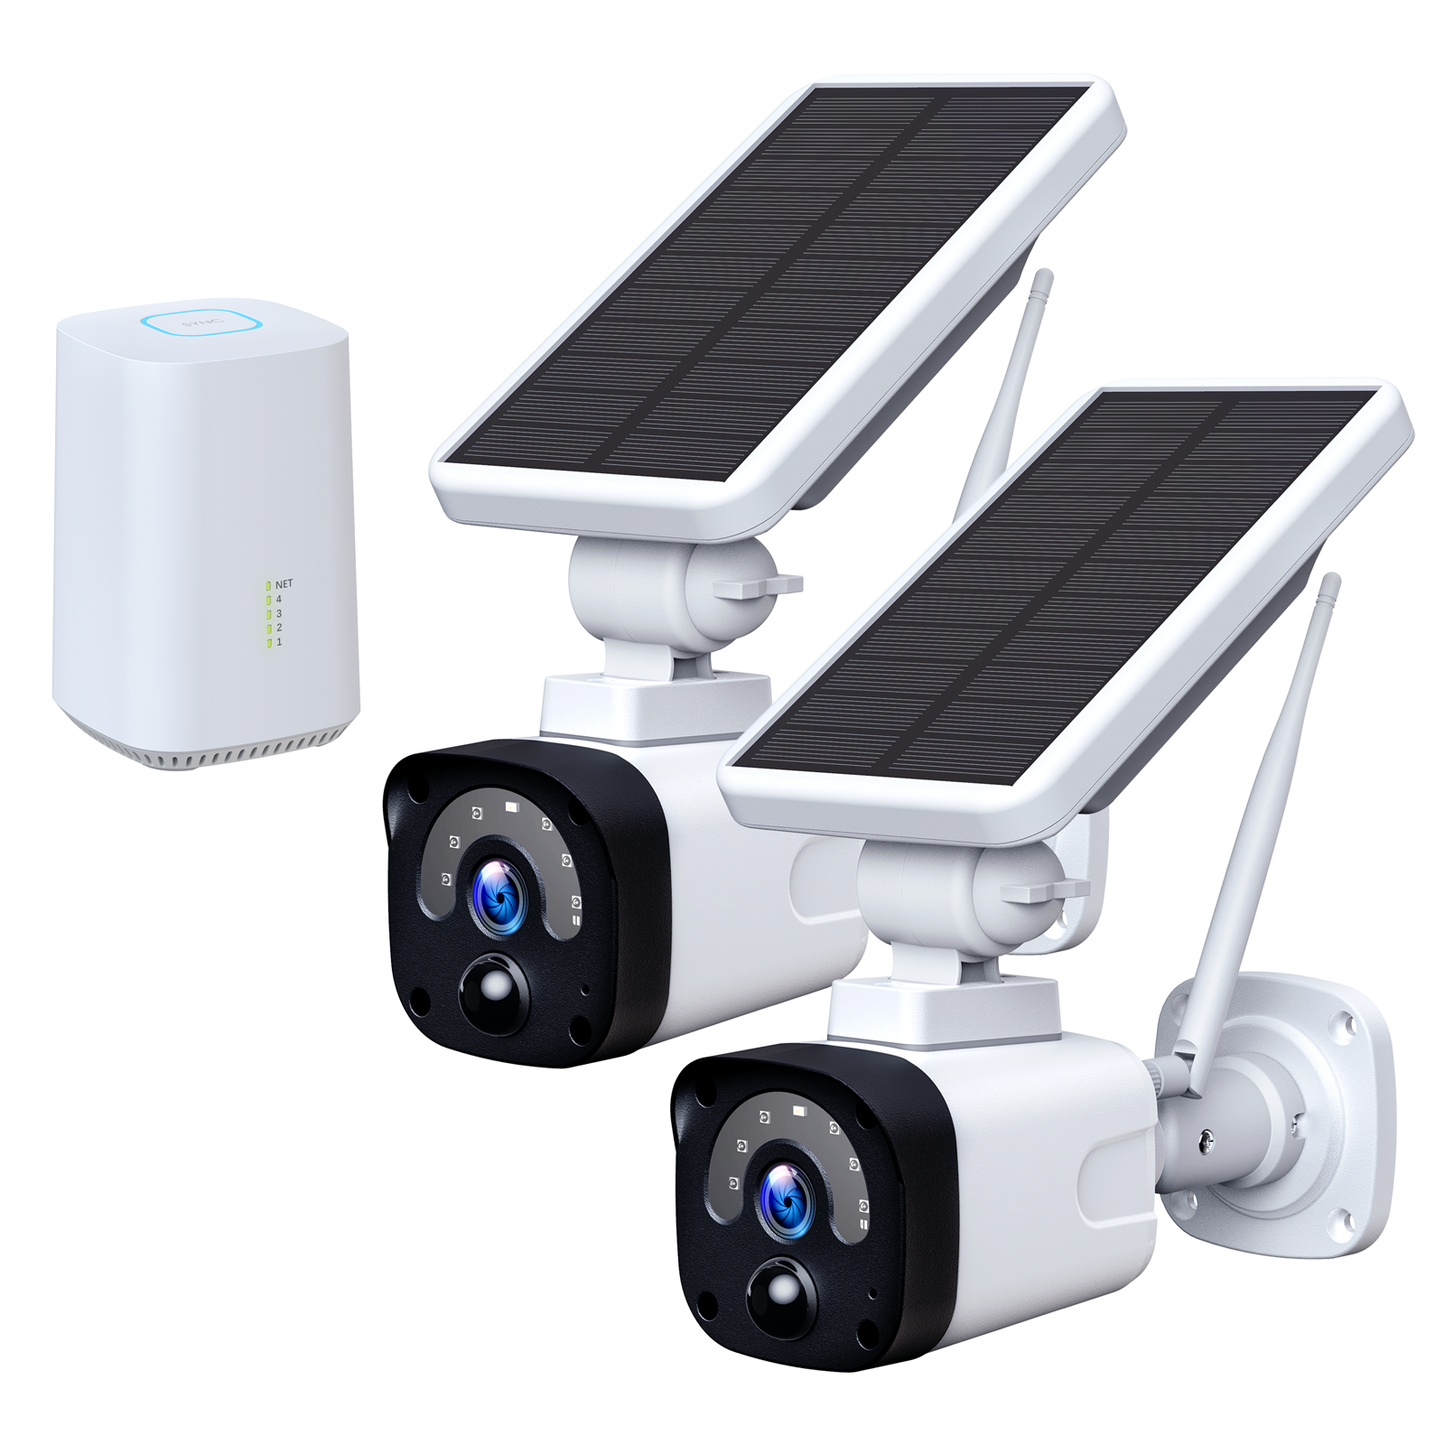 TOGUARD 3MP Solar Wireless Outdoor Security Camera System with Base Station(2 PCS)